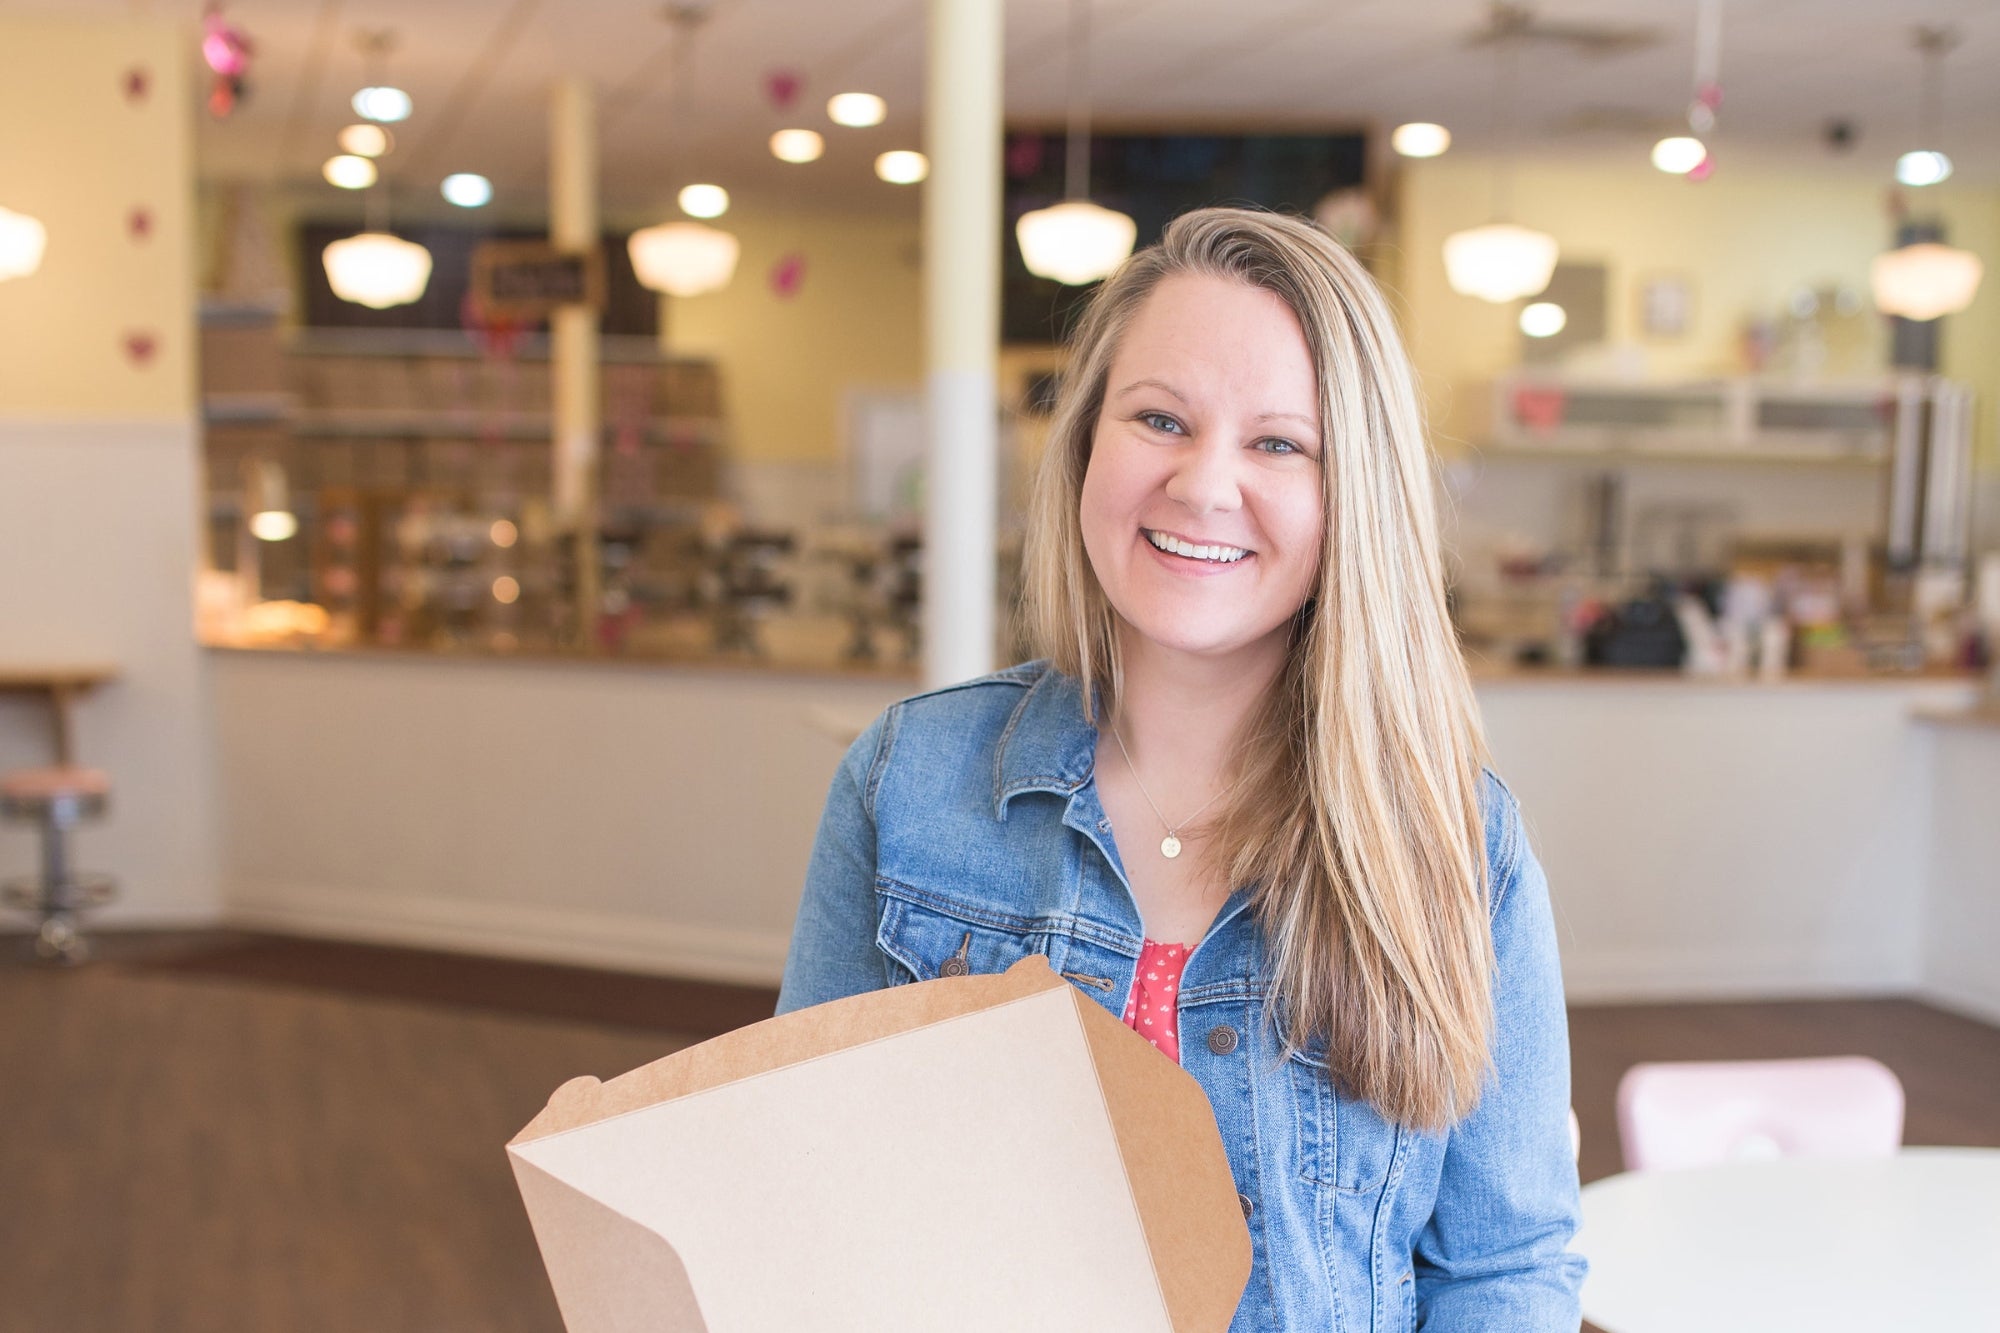 How an Iowa Bakery Owner Built a Franchise From Scratch